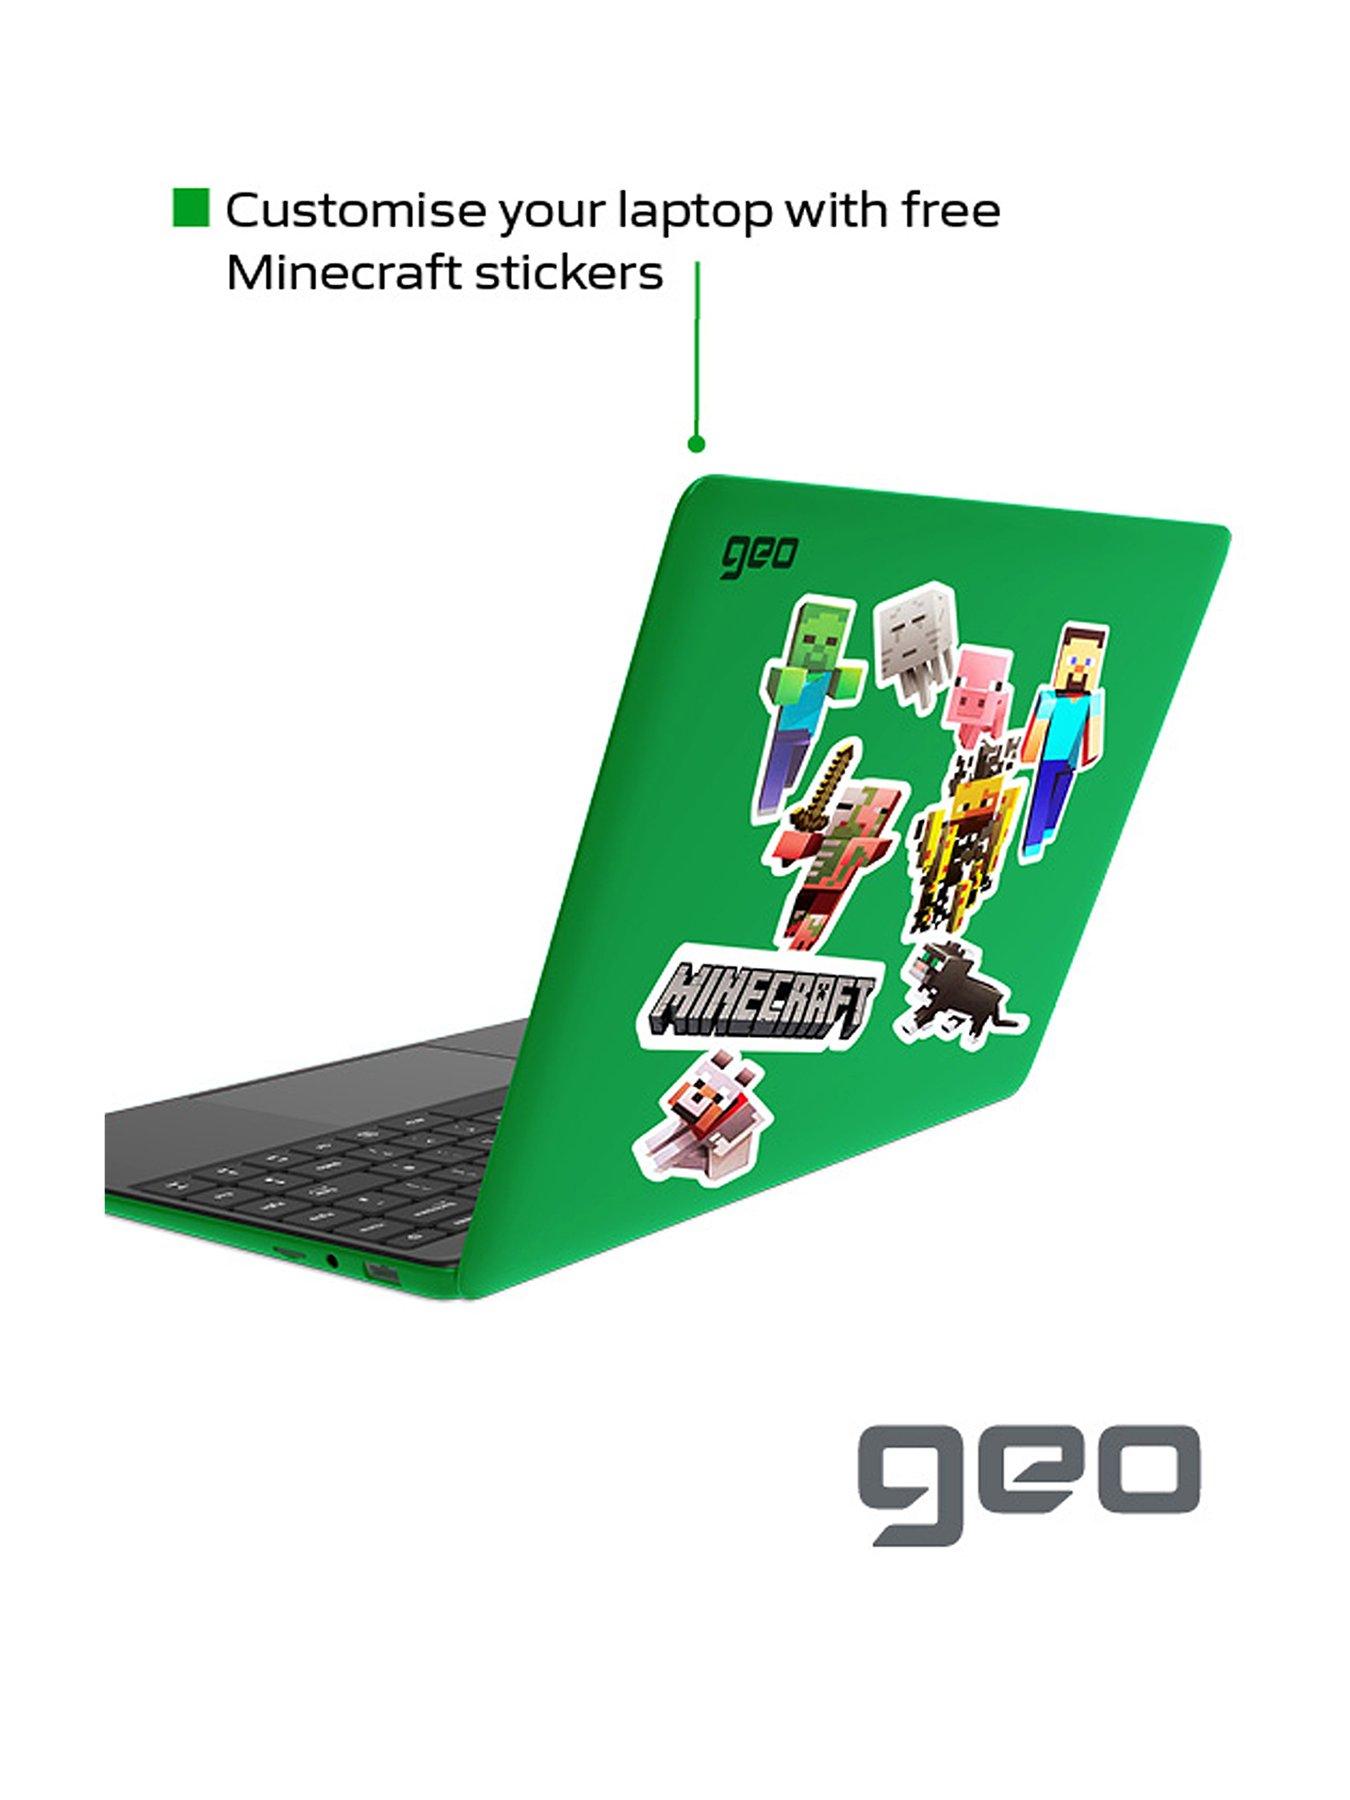 Geo Geobook 140 Minecraft Intel Celeron 4gb Ram 64gb Storage 14in Hd Laptop With Microsoft 365 Personal Included And Optional Norton 360 Very Co Uk